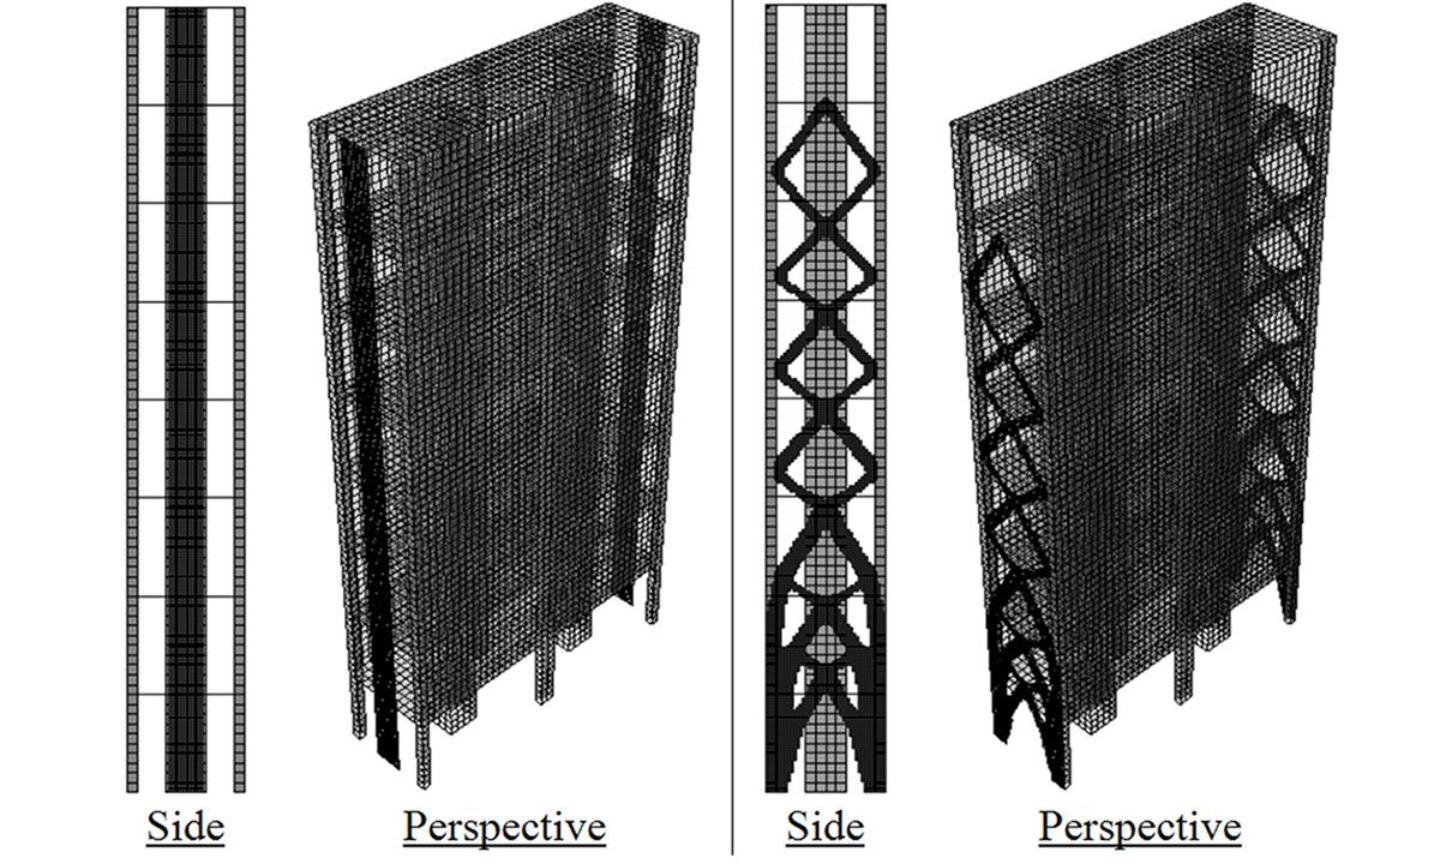 Image of bracing systems for high-rise buildings. Conventional shear wall design (left) compared to an optimal bracing system obtained from BESO (right).